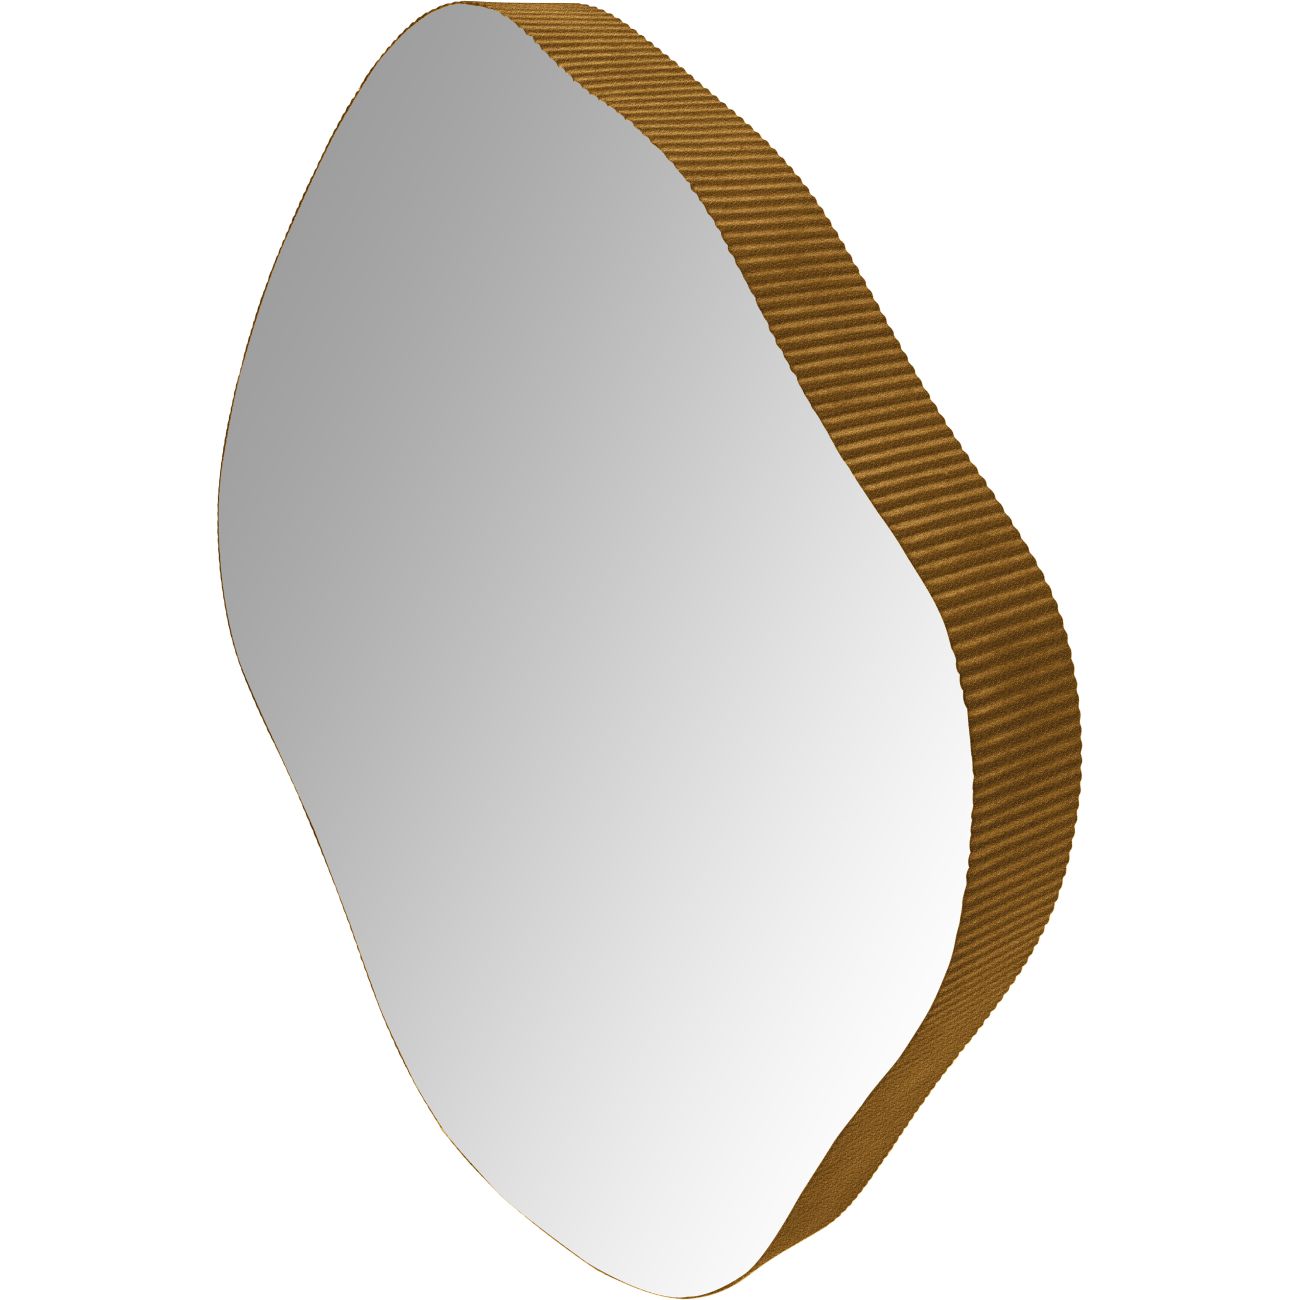 Fluidic Metal Framed Mirror Aged Champagne Finish Large 97x101cm